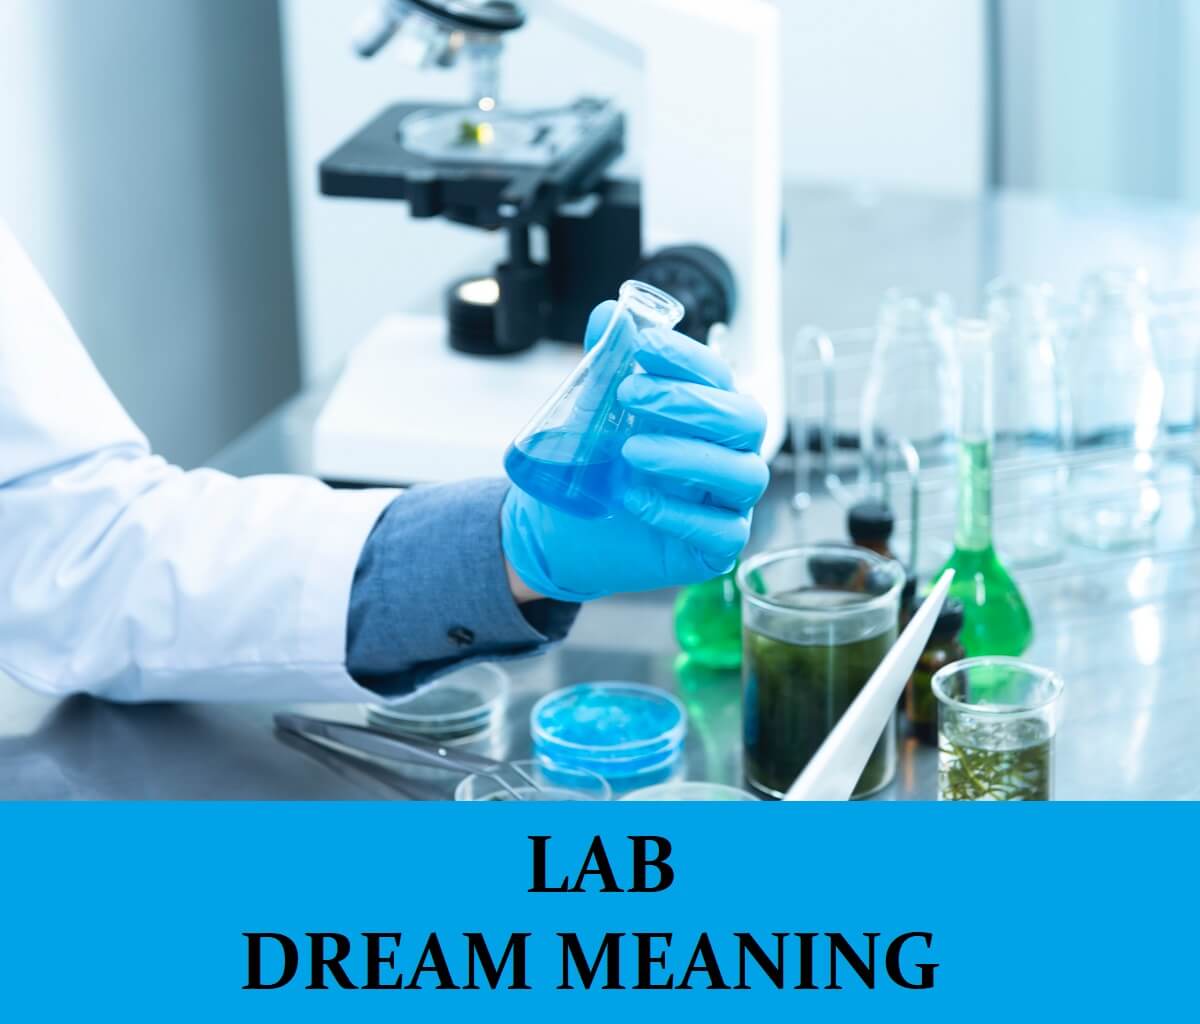 Dream About Labs